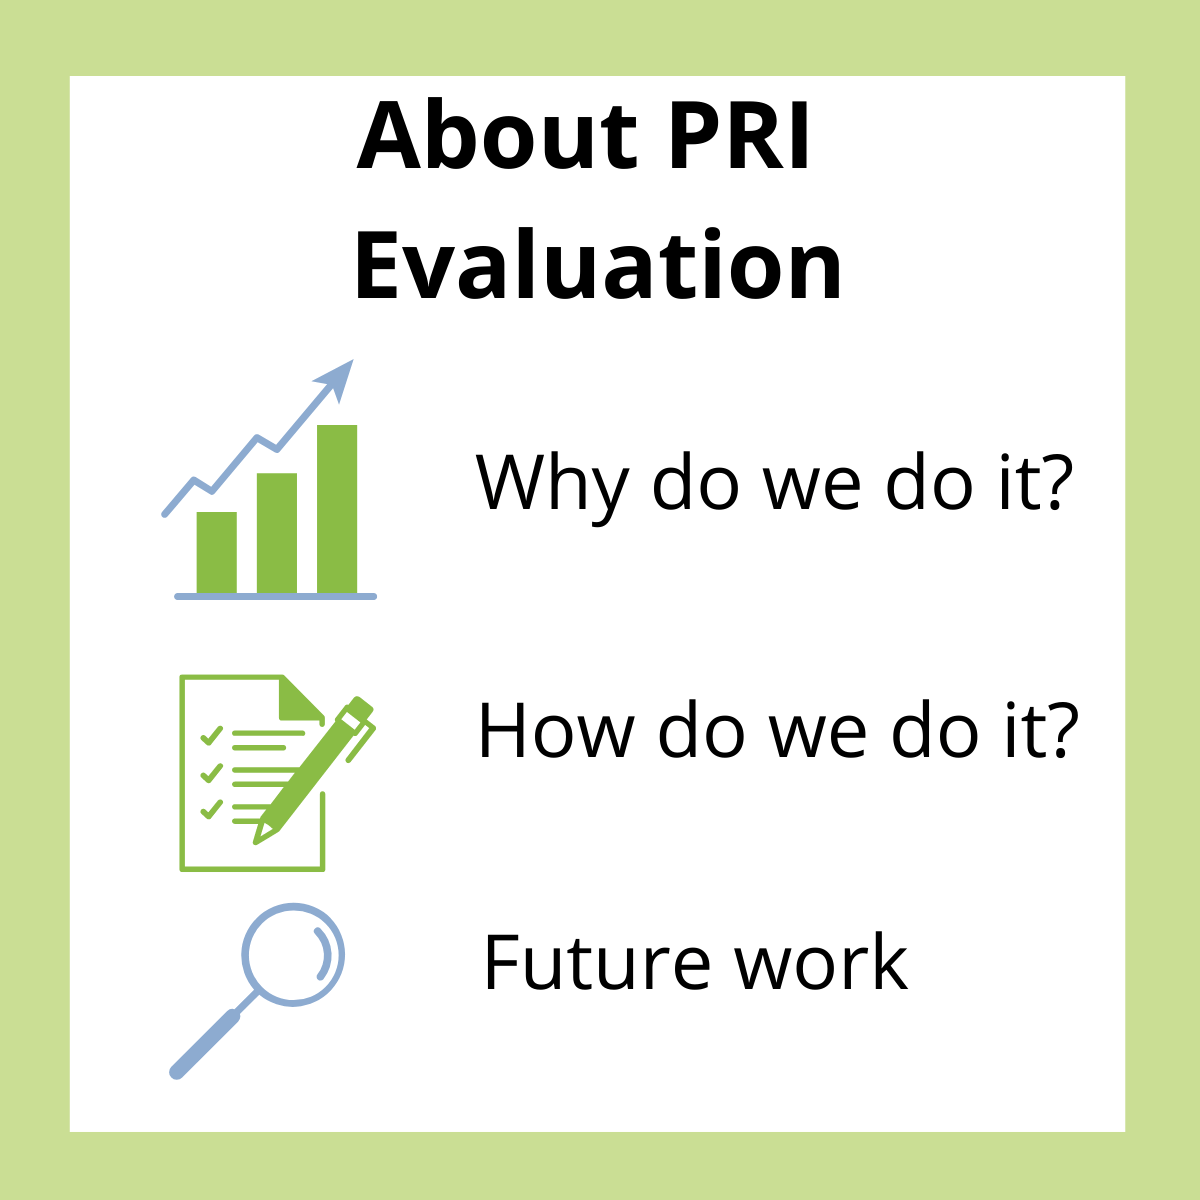 Impact Homepage - About PRI Evaluation